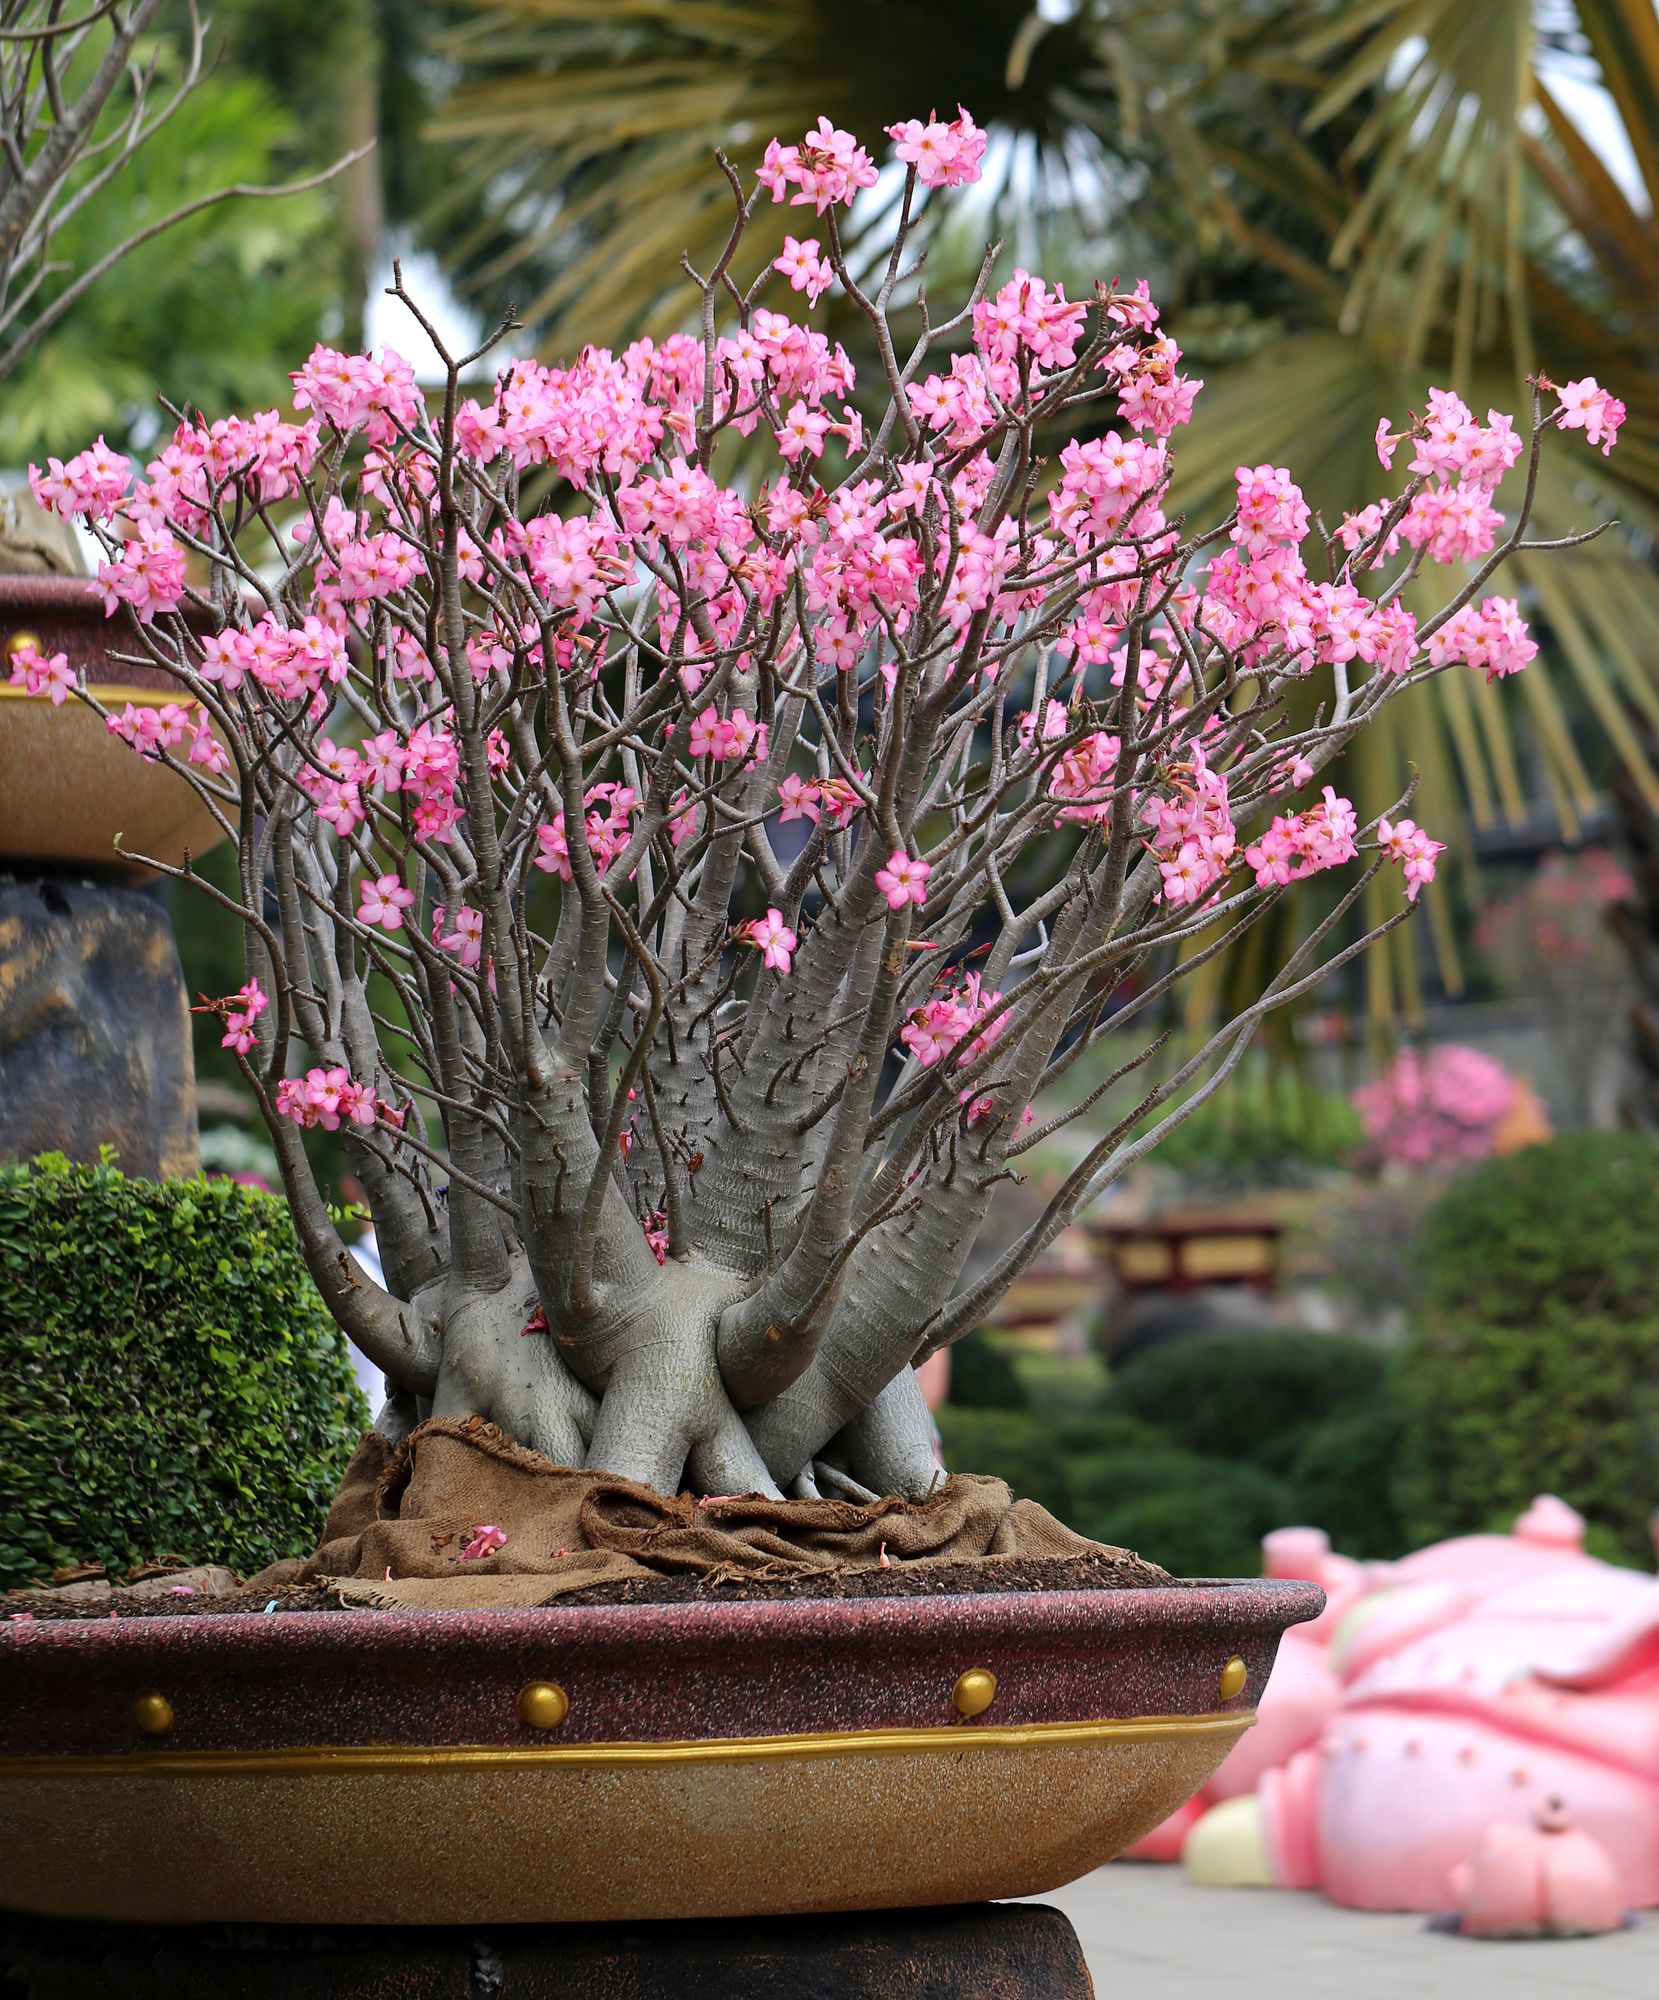 Grown bonsai tree with several branches blossoming with pink flowers situated outside